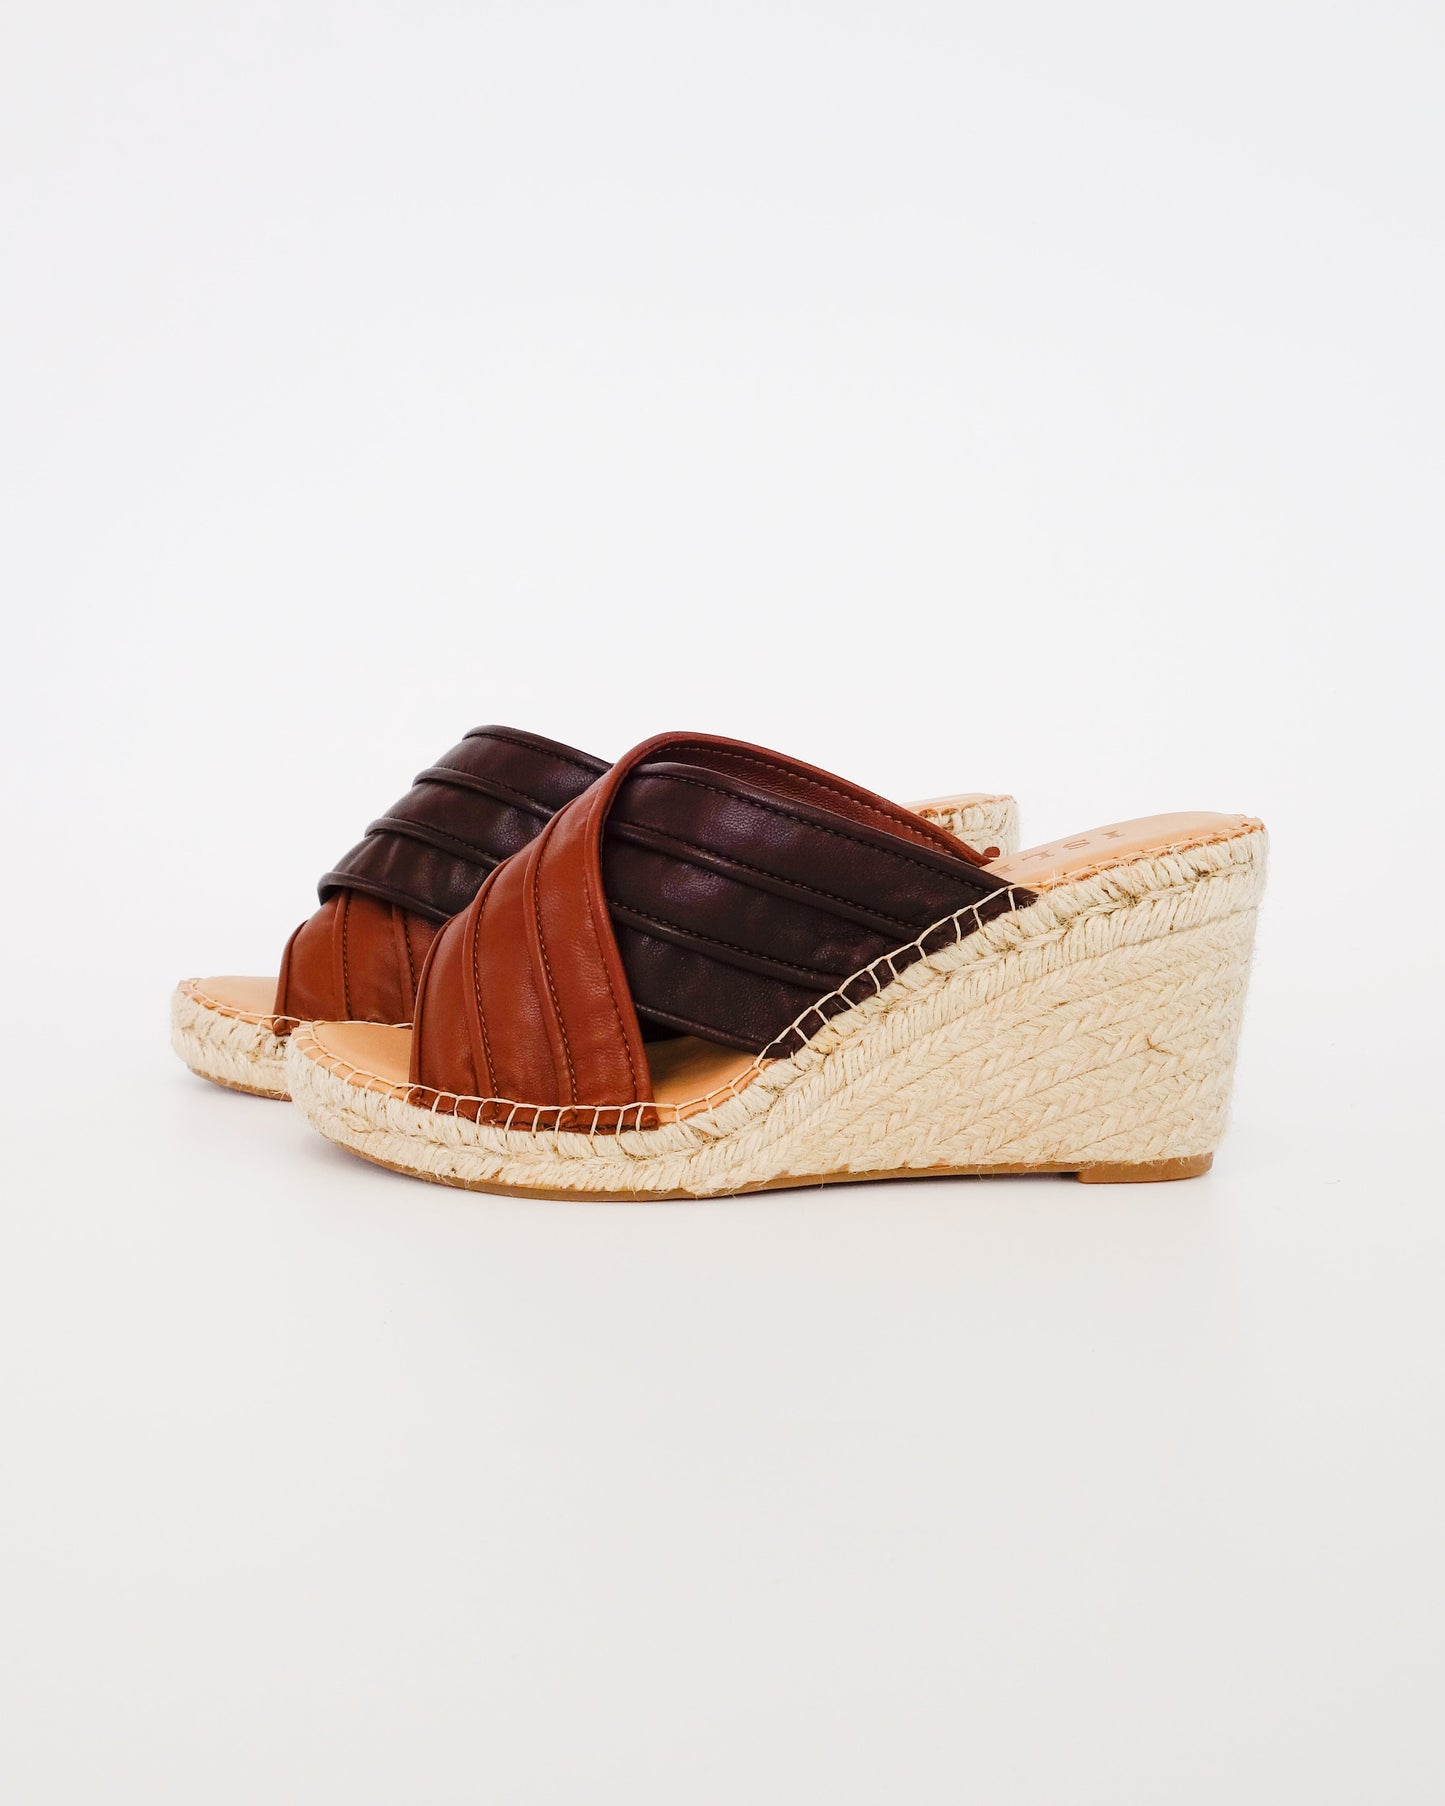 Criss Cross Wedge | Two-Tone Brown